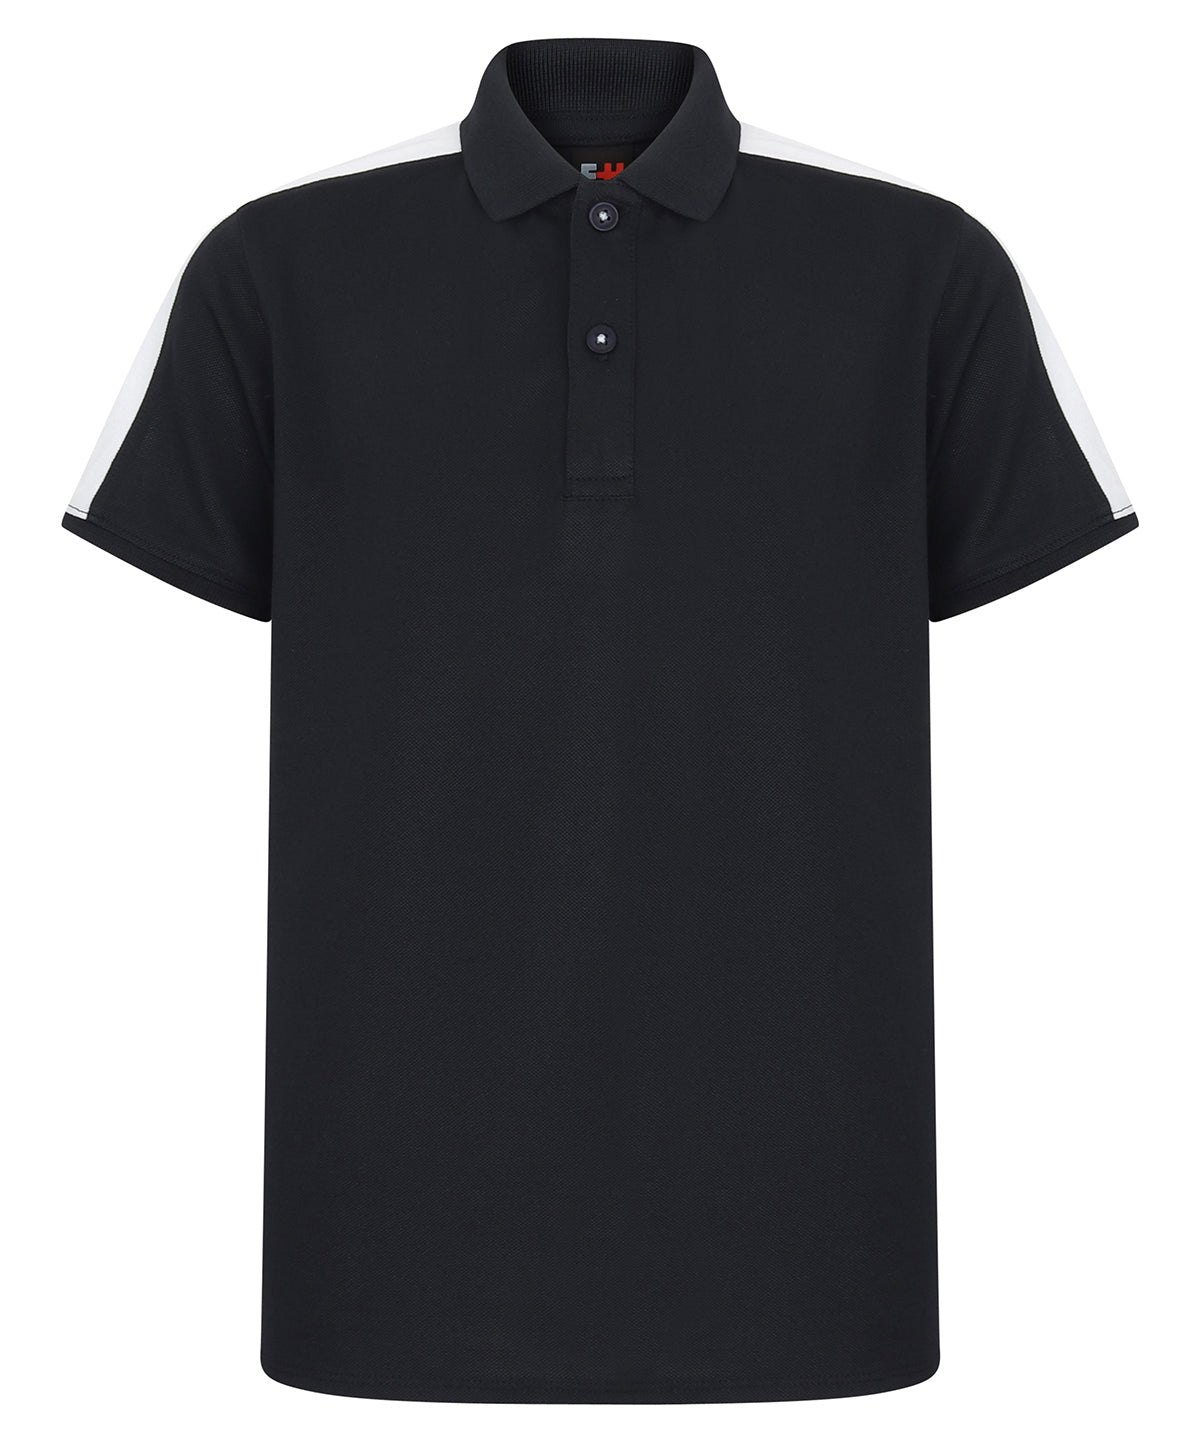 Personalised Polo Shirts - Black Finden & Hales Kids contrast panel polo